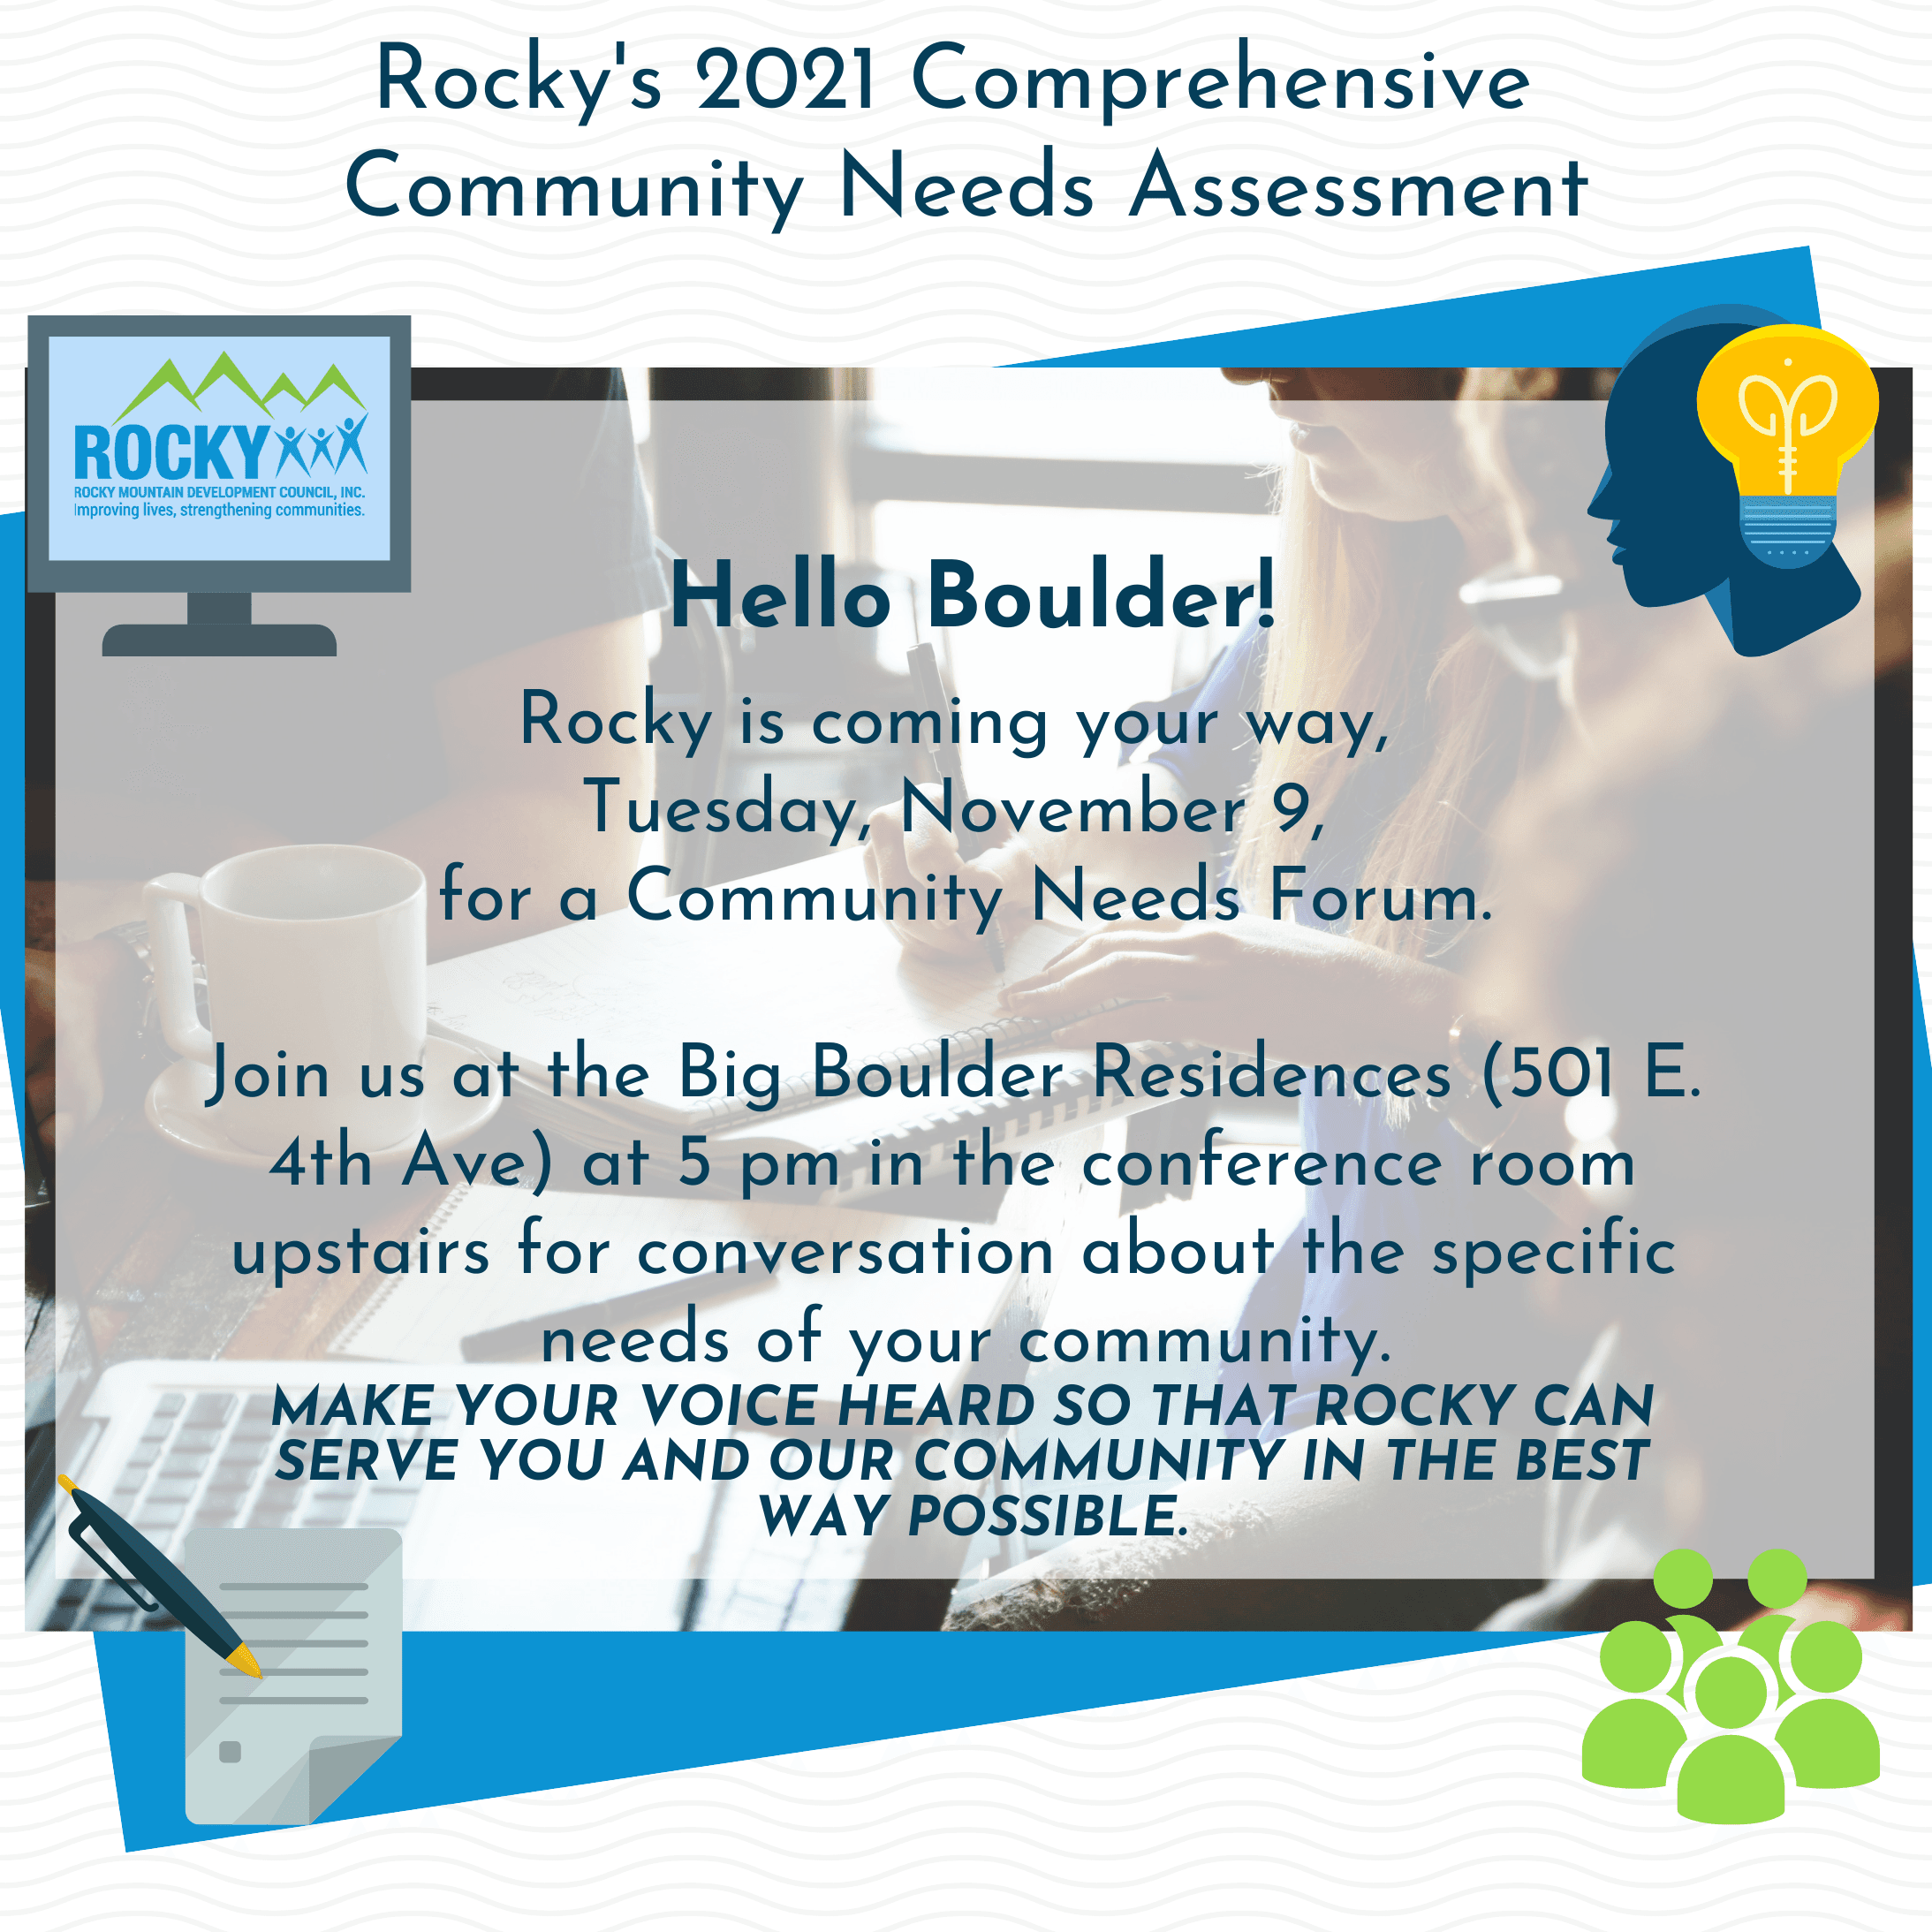 Join us at the Big Boulder Residences (501 E. 4th Ave) at 5 pm in the conference room upstairs for conversation about the specific needs of your community.